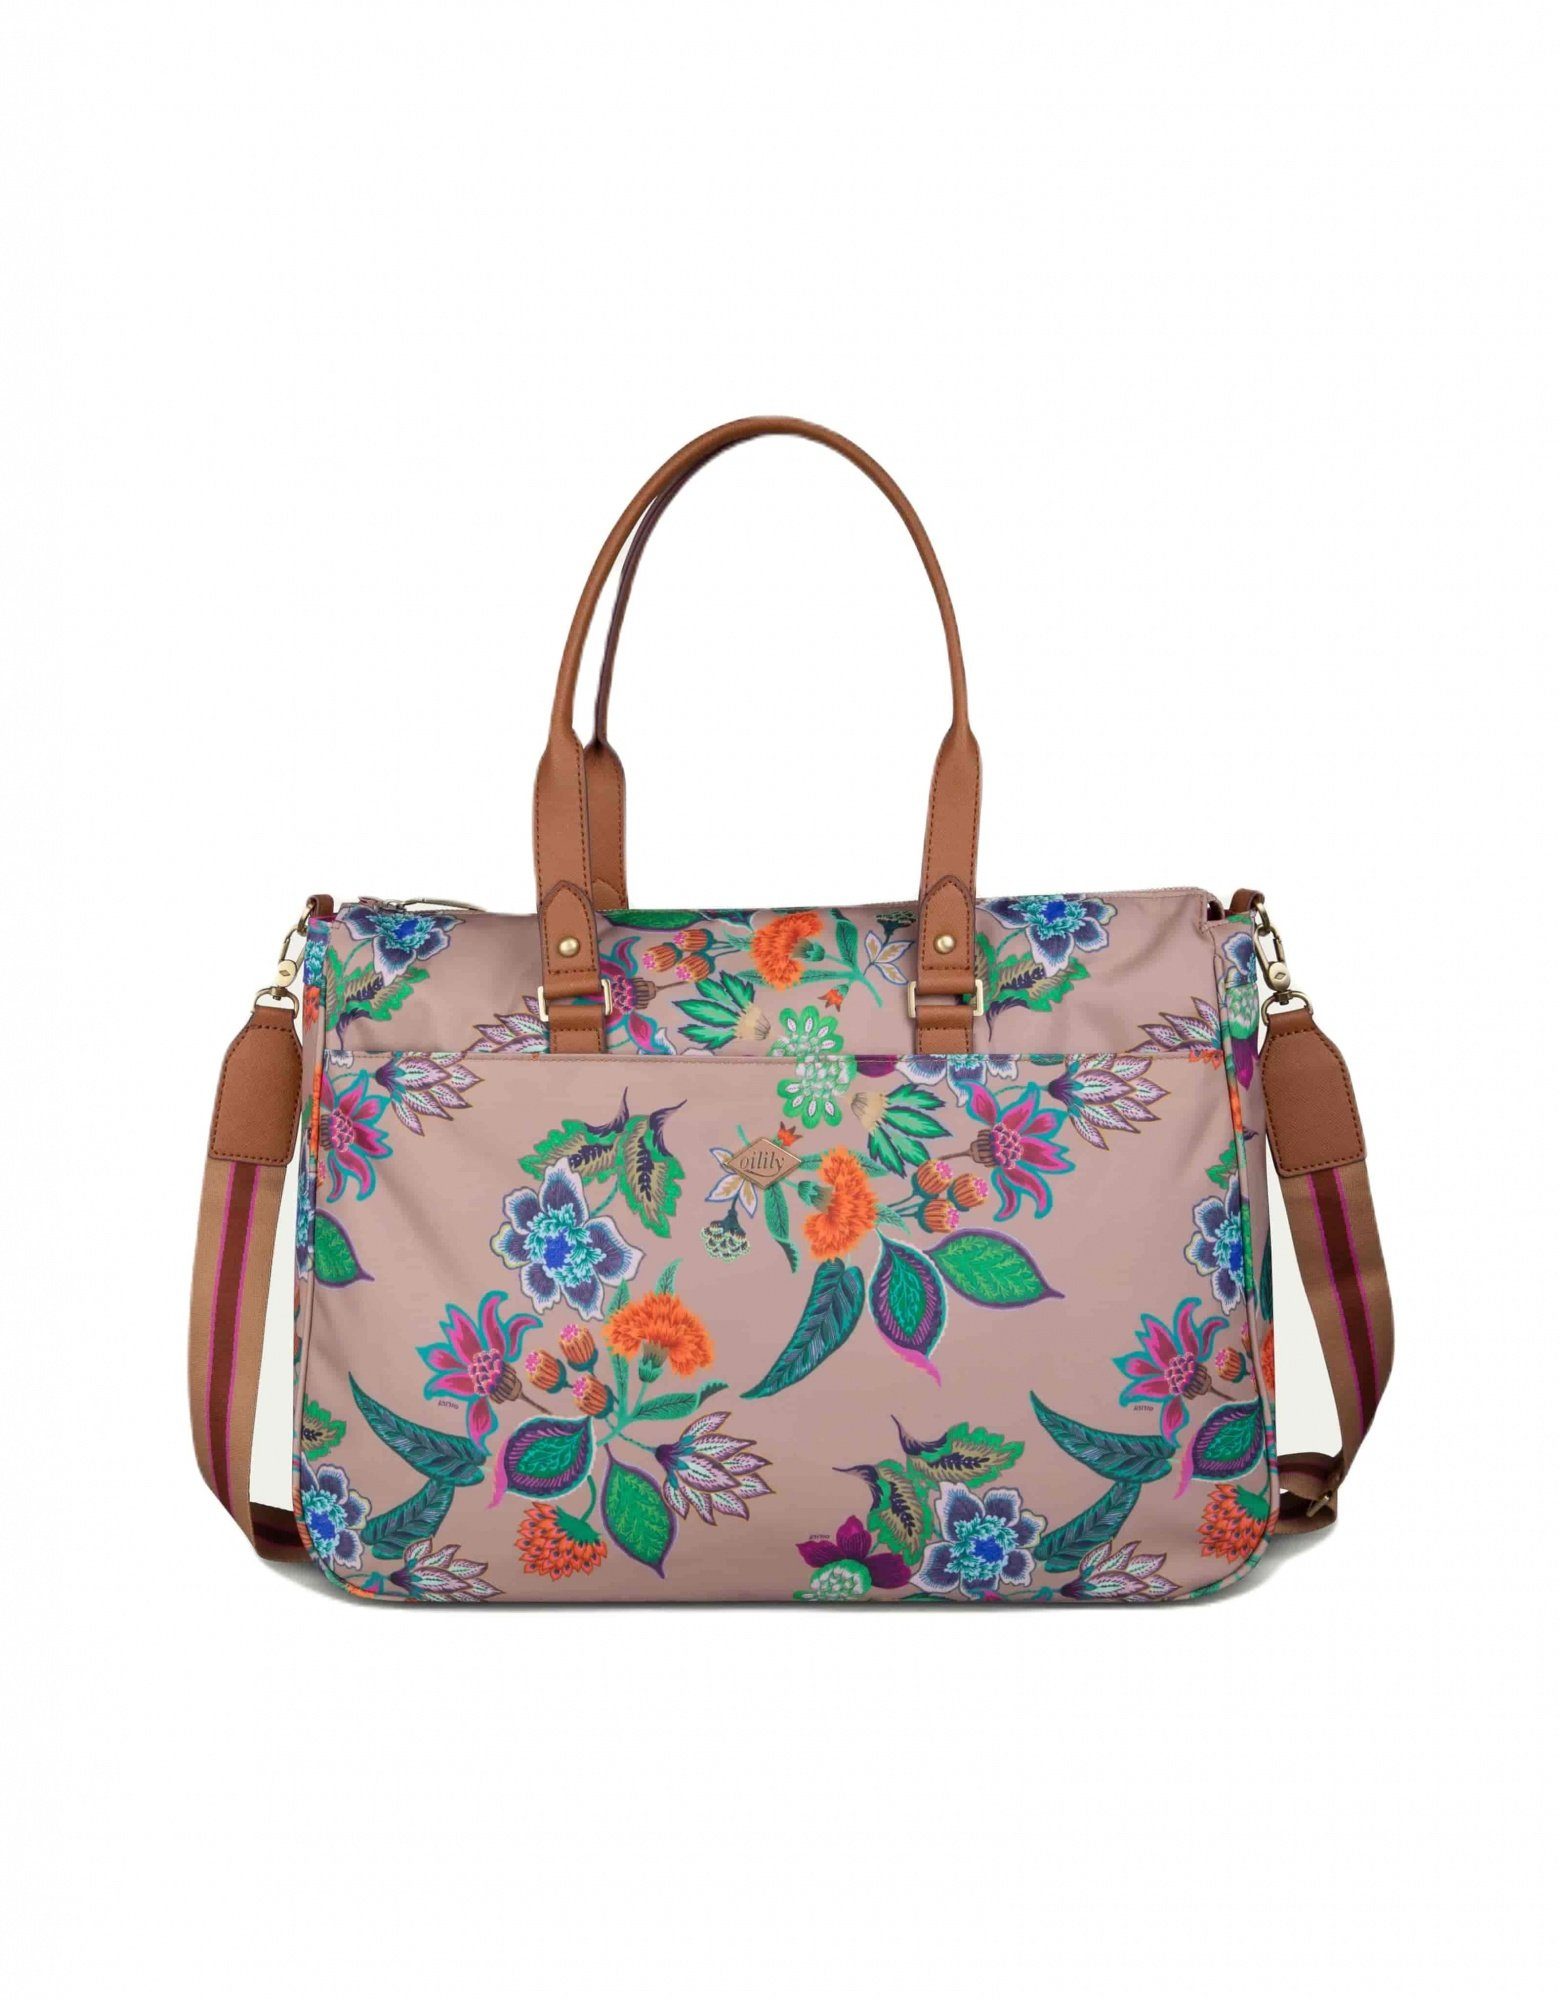 Oilily Schultertasche Sonate Carry All